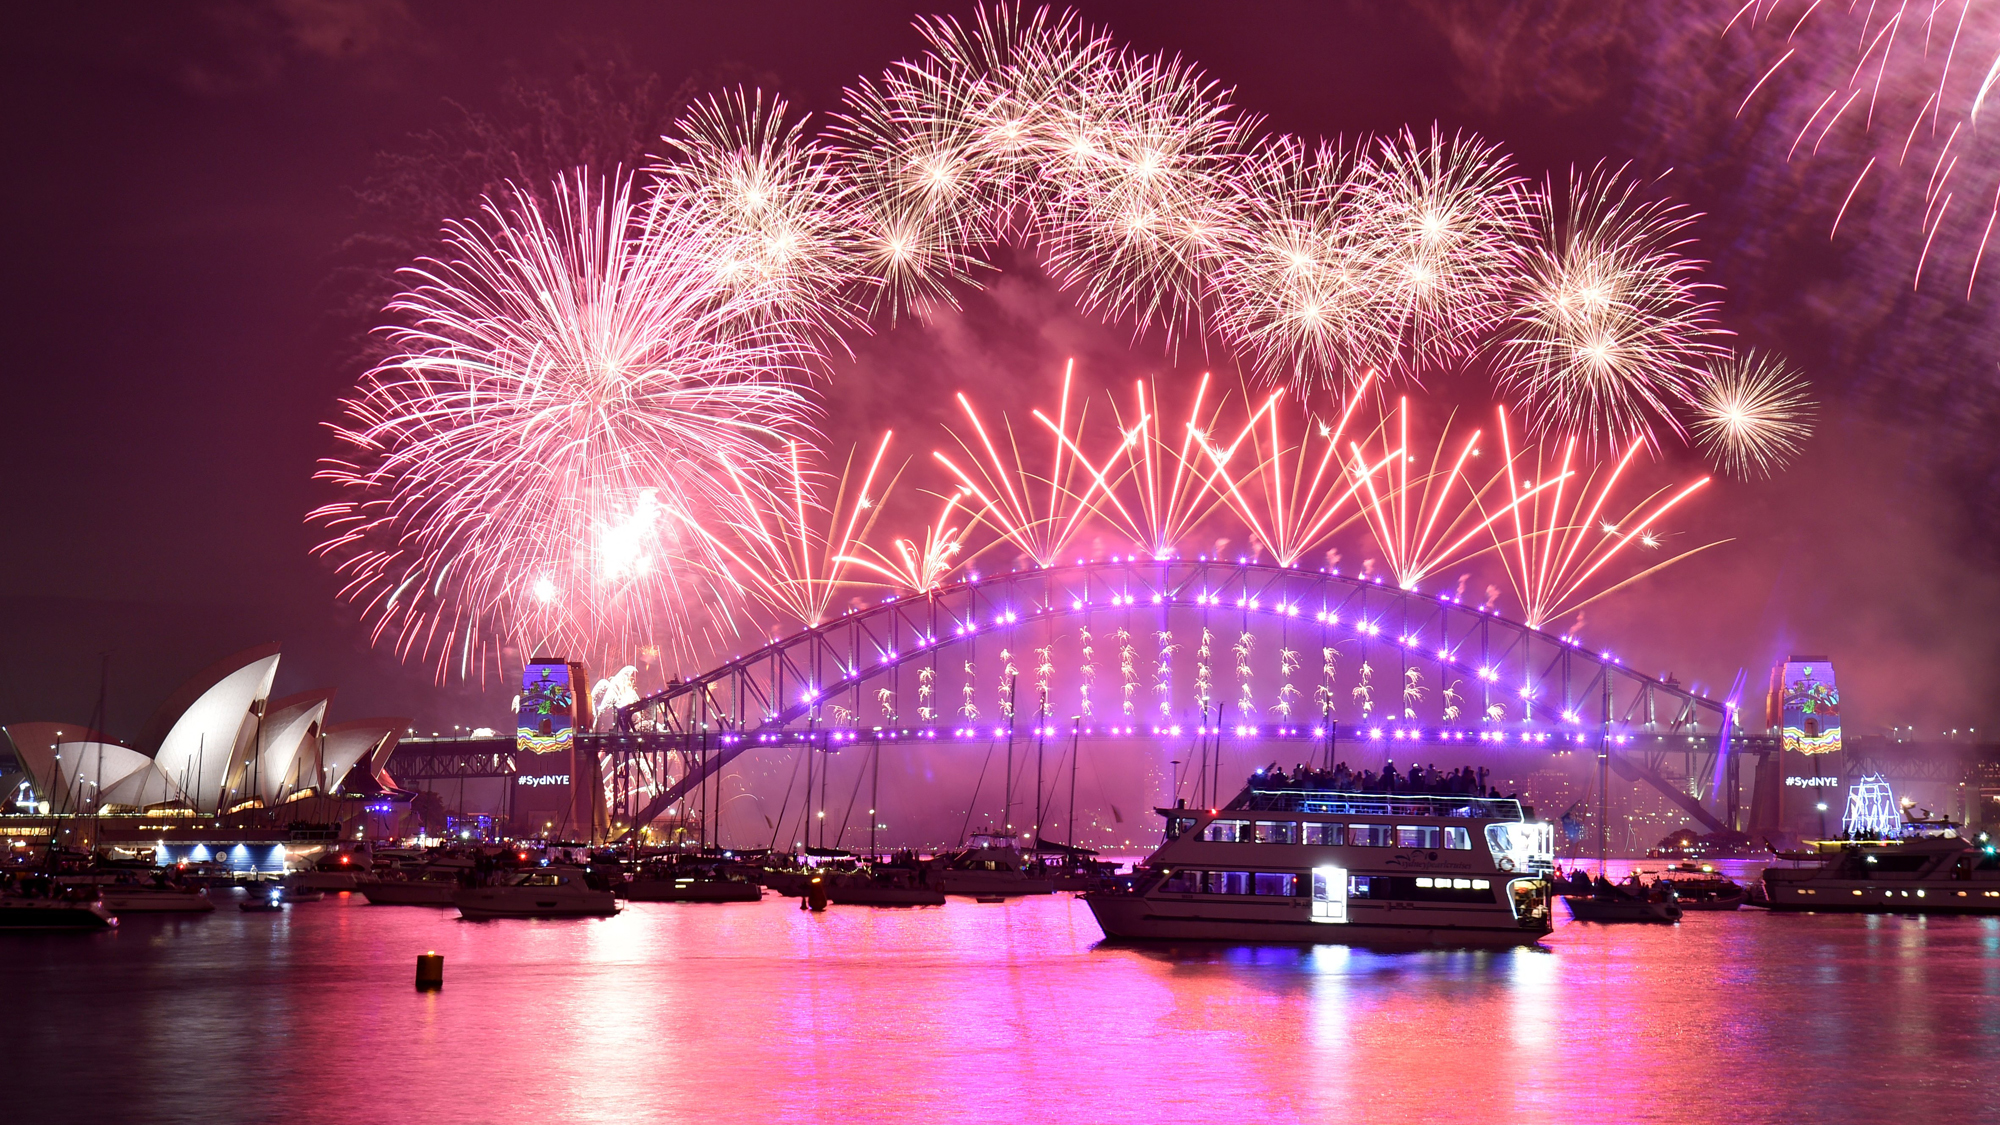 10 great places to spend New Year's Eve | CNN Travel